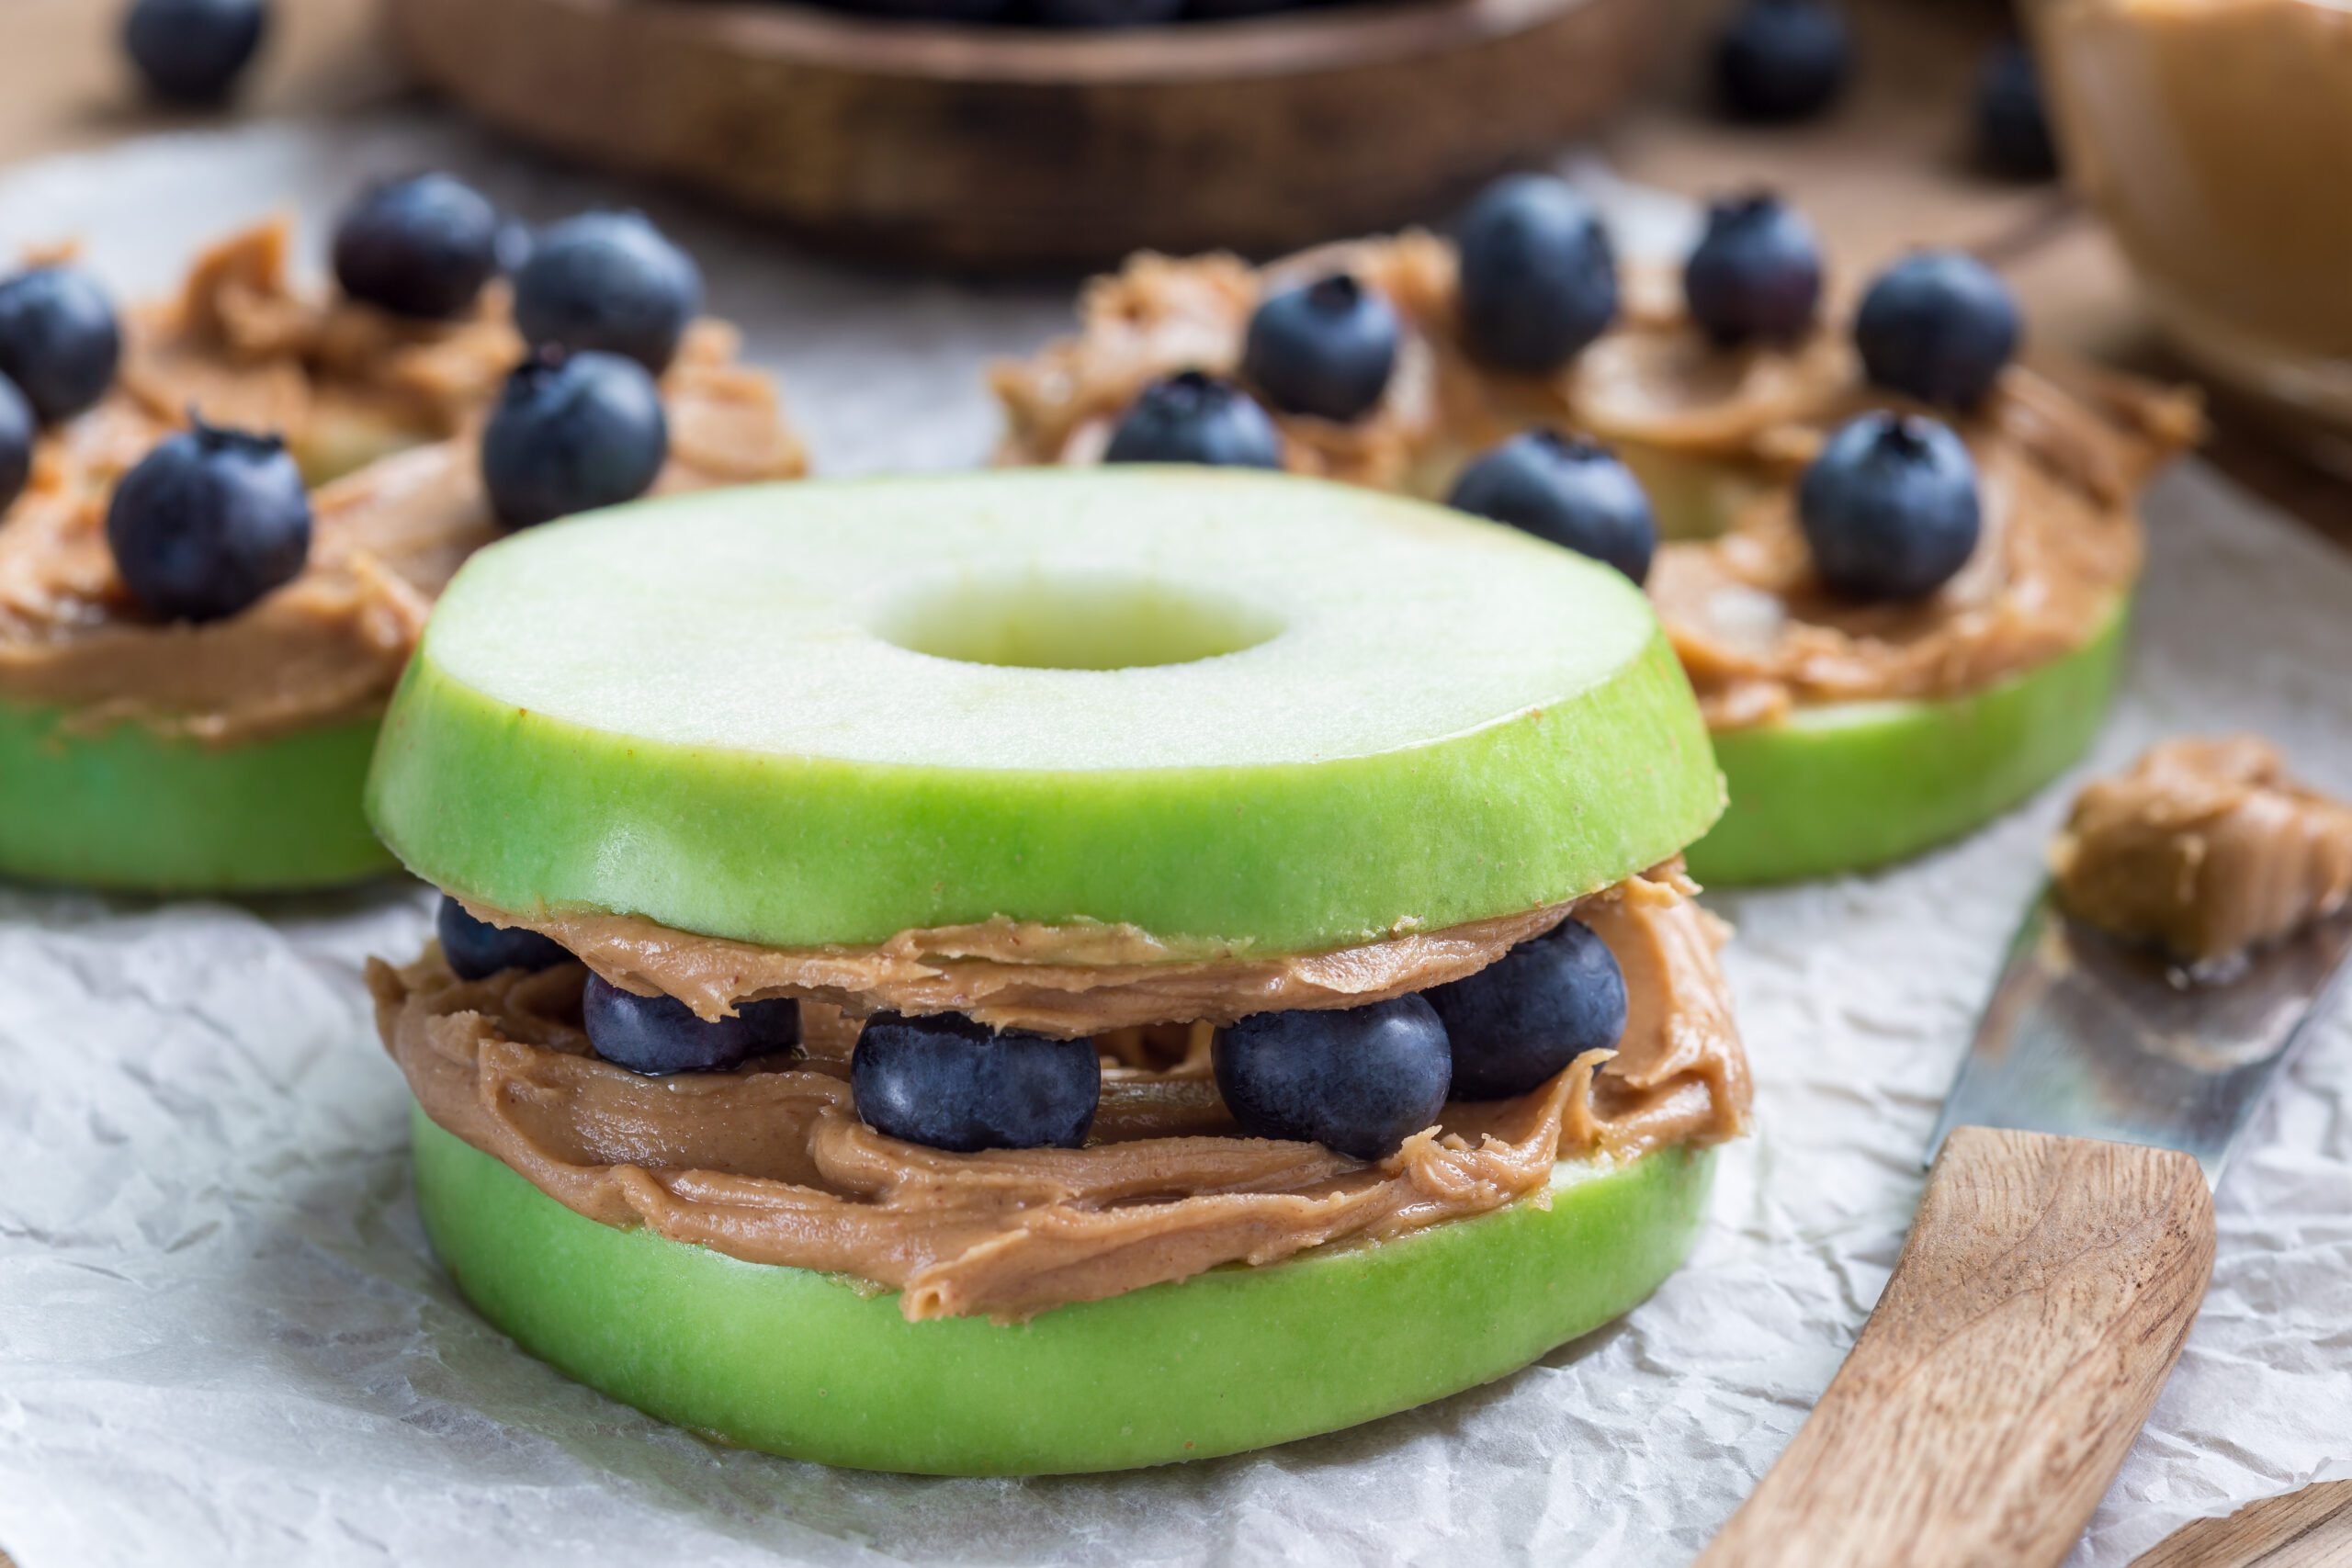 Green apple rounds with peanut butter and blueberries